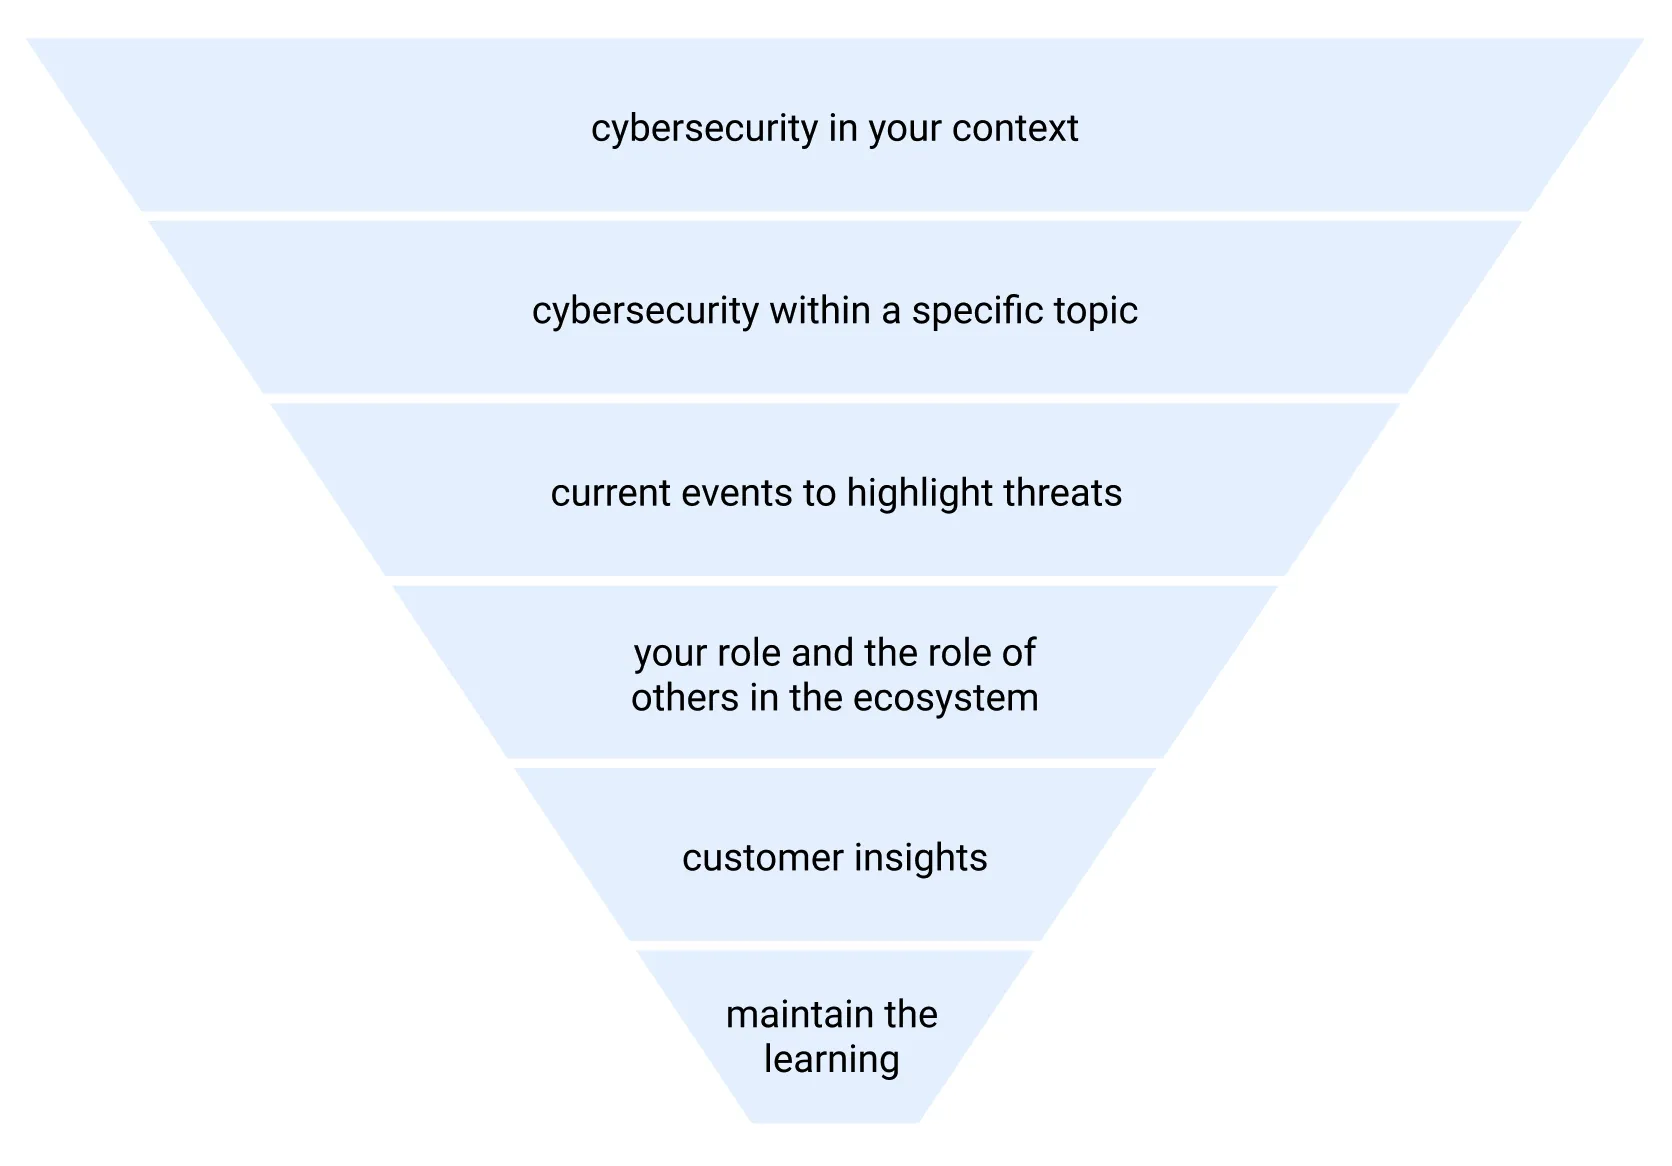 A funnel diagram depicting how the Perygee team thinks about sharing cybersecurity with others.